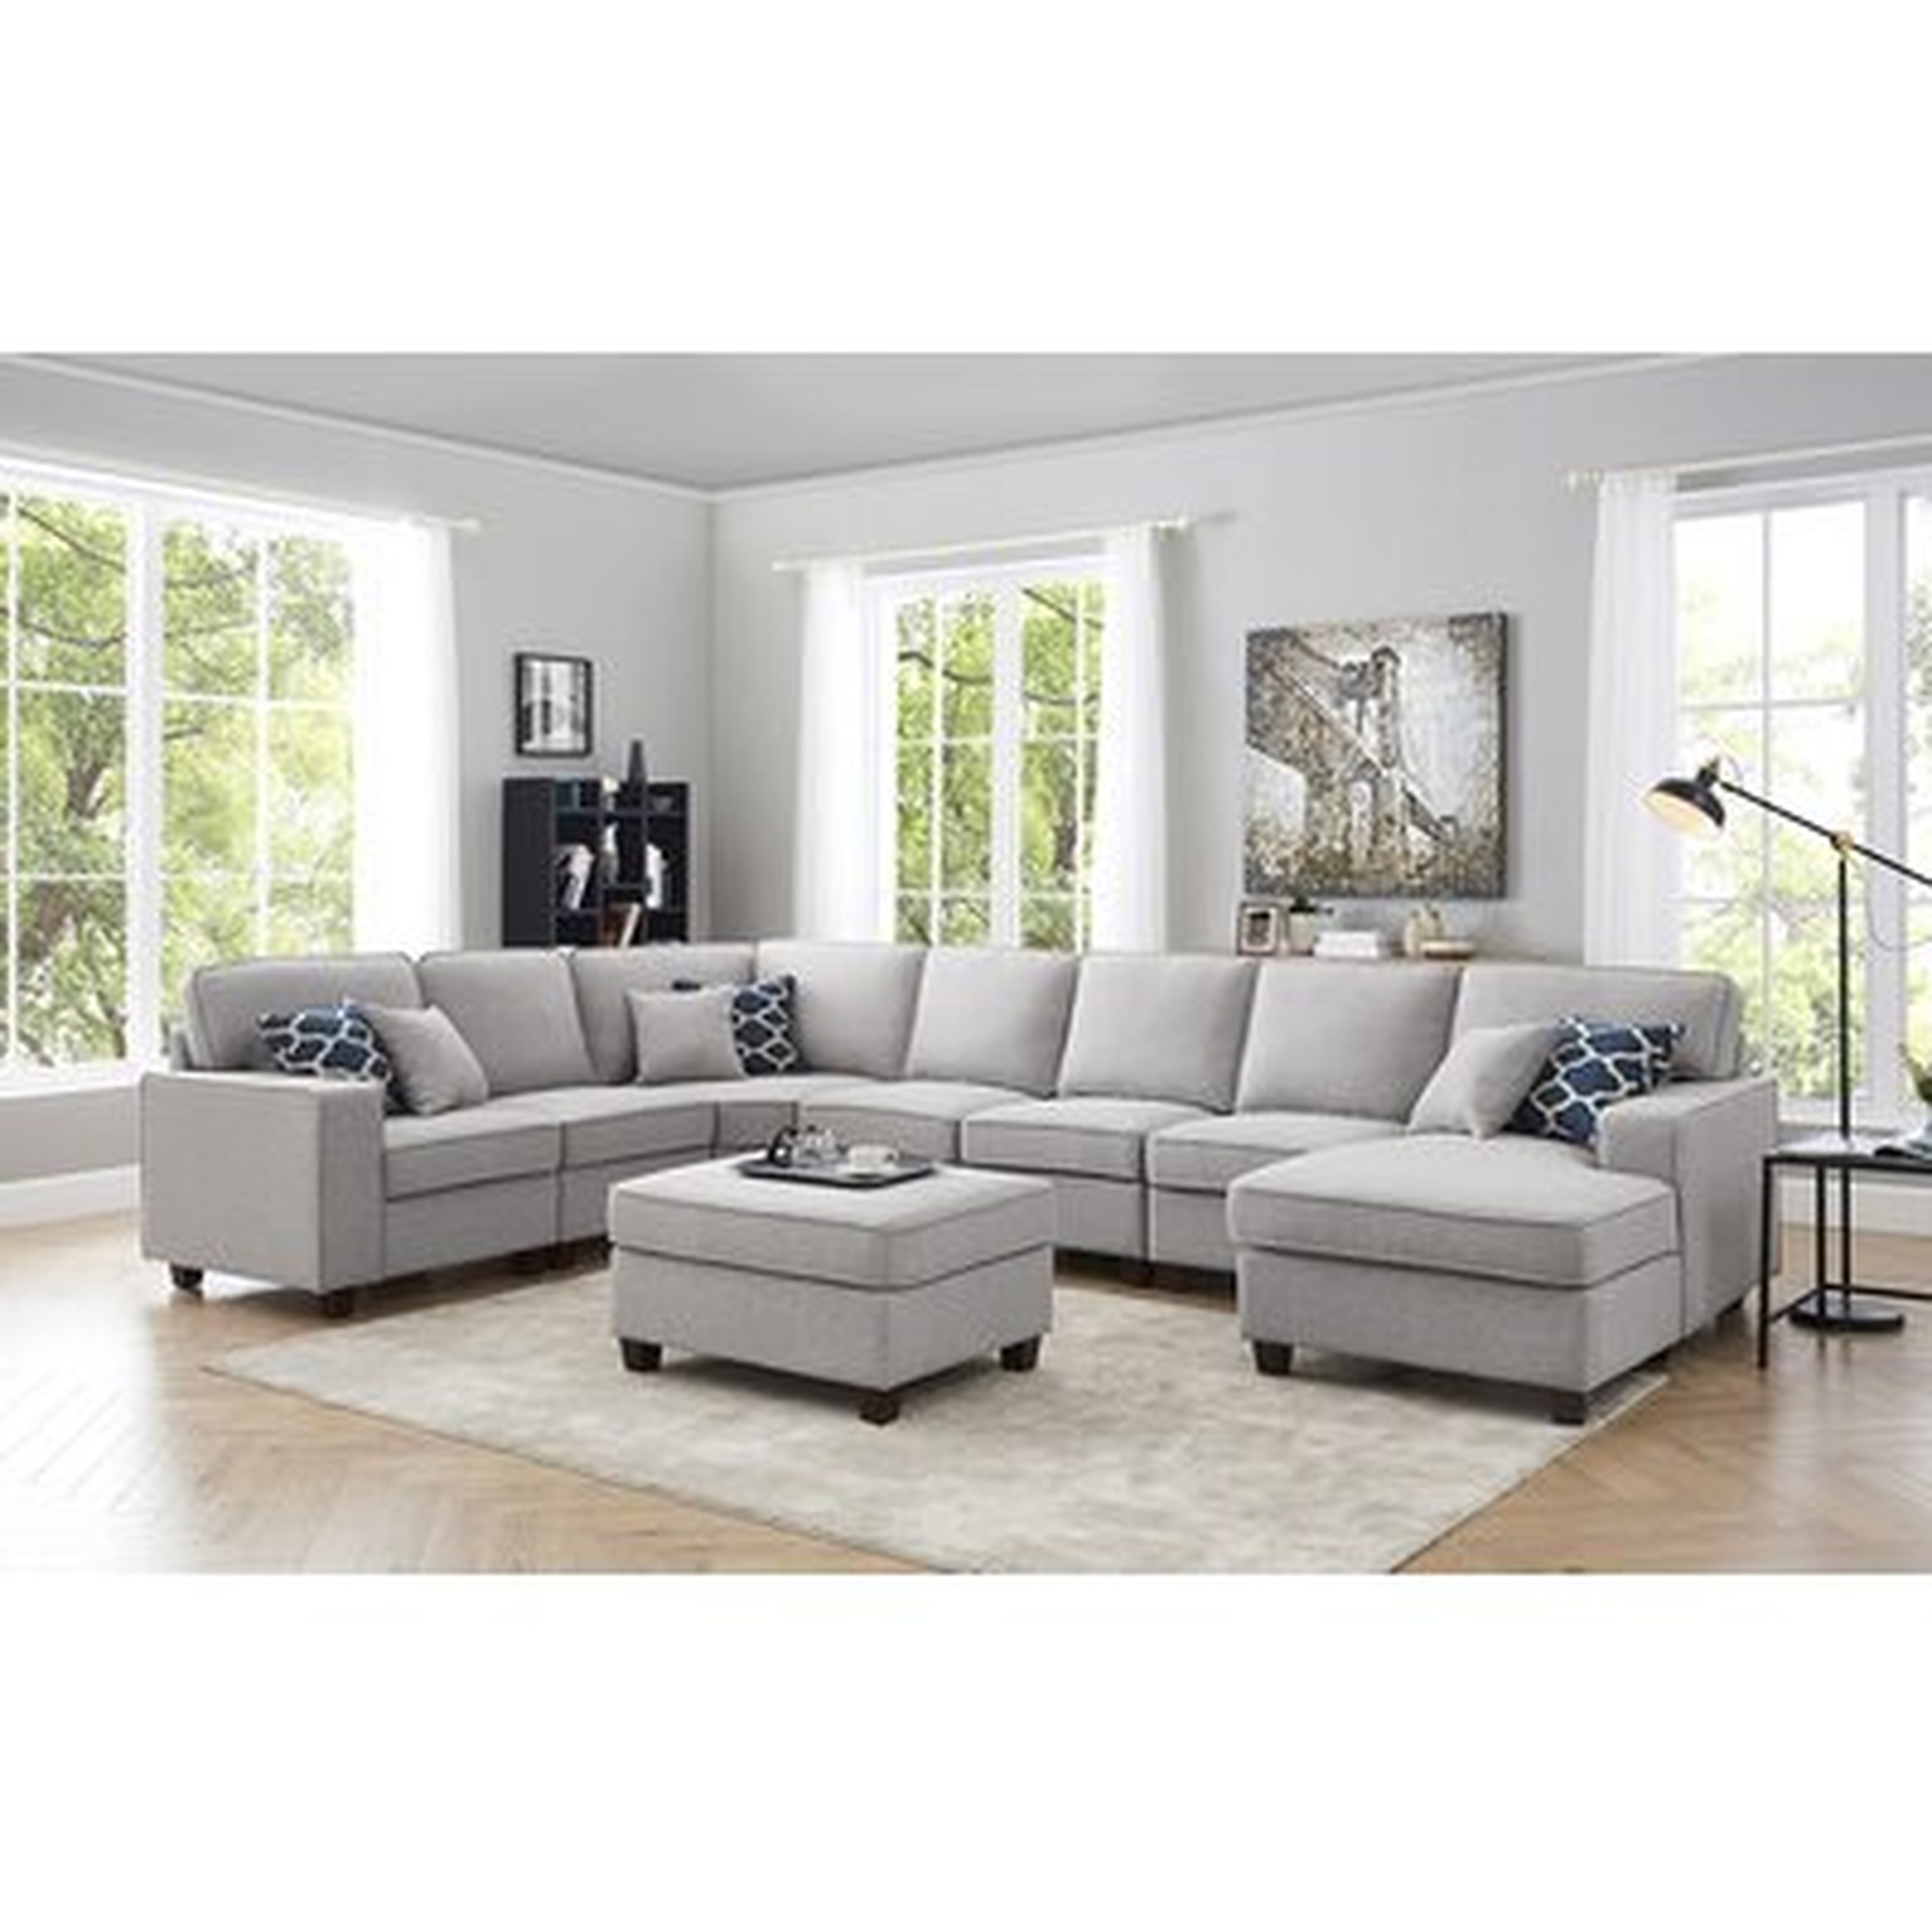 Nelms 149.5" Wide Right Hand Facing Corner Sectional with Ottoman - Wayfair